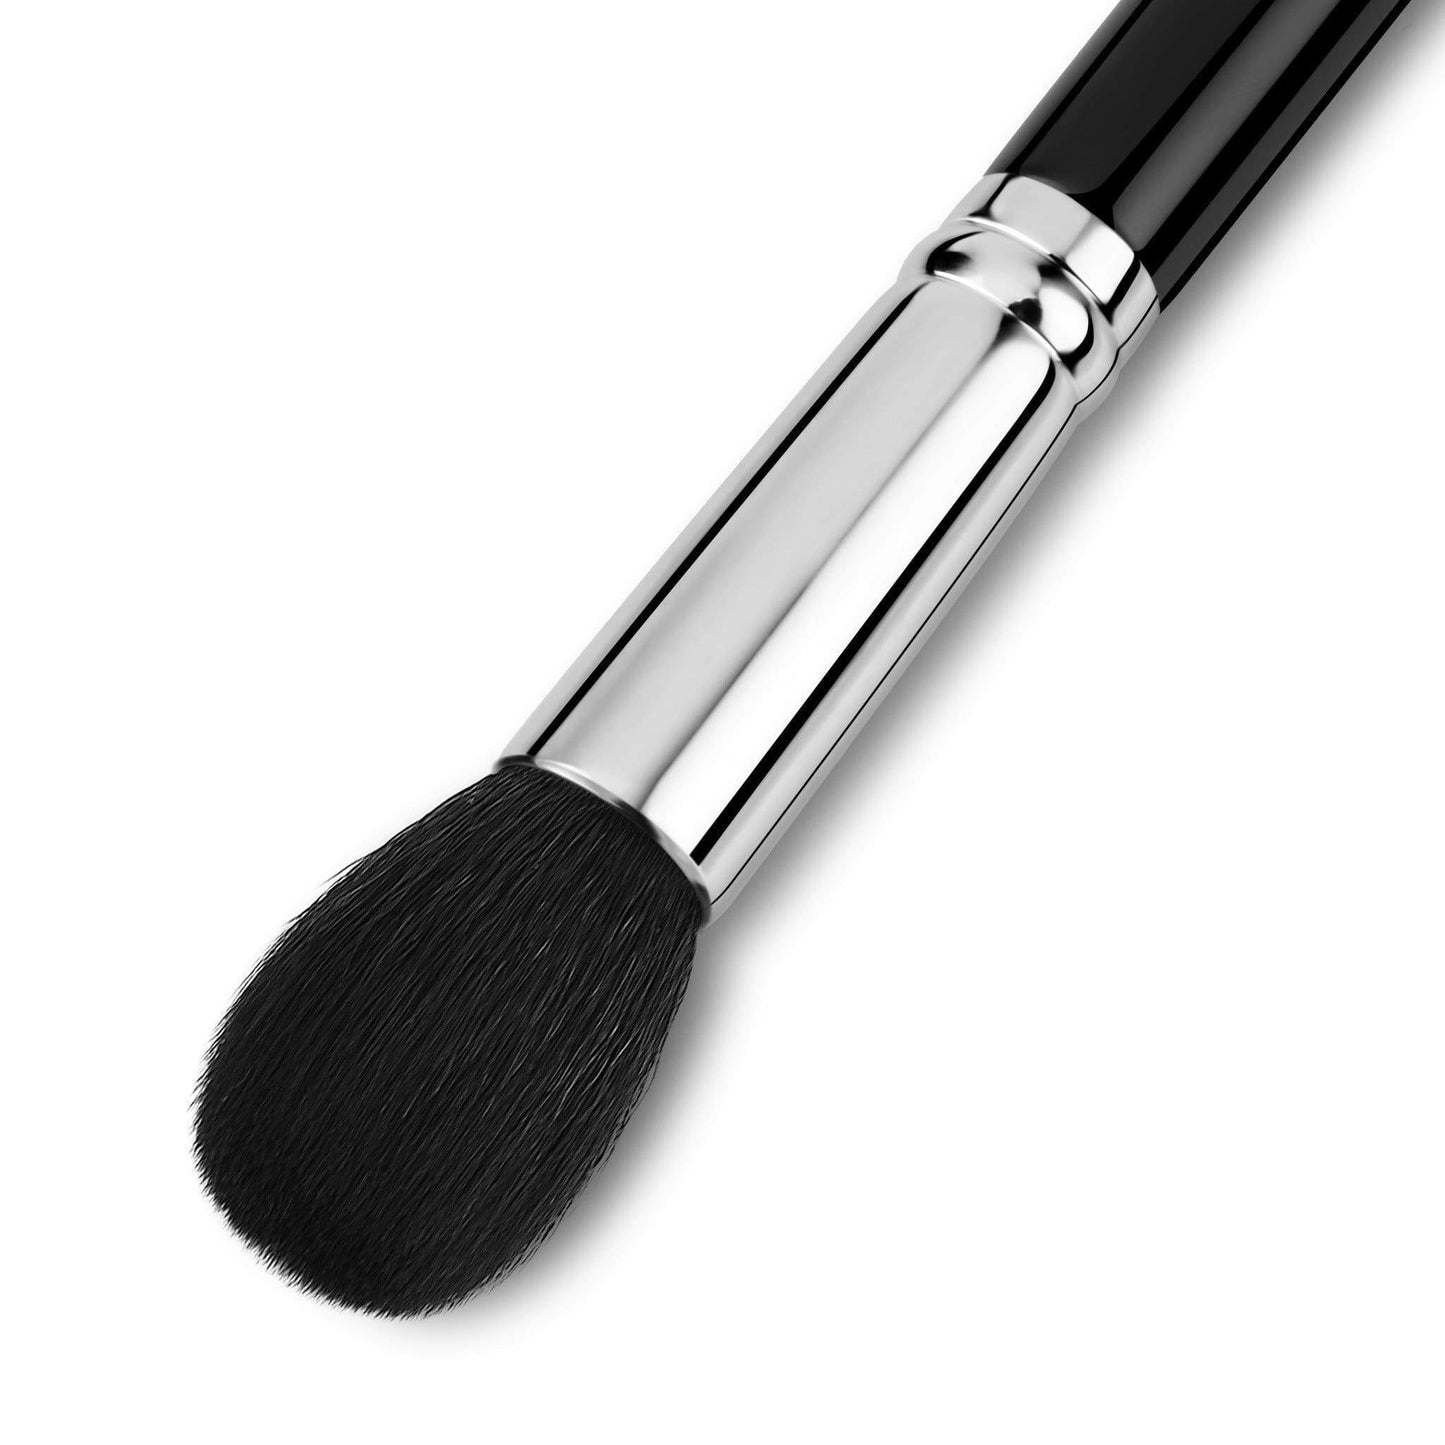 F626 - SMALL DOME POWDER BRUSH - EIGSHOW Beauty